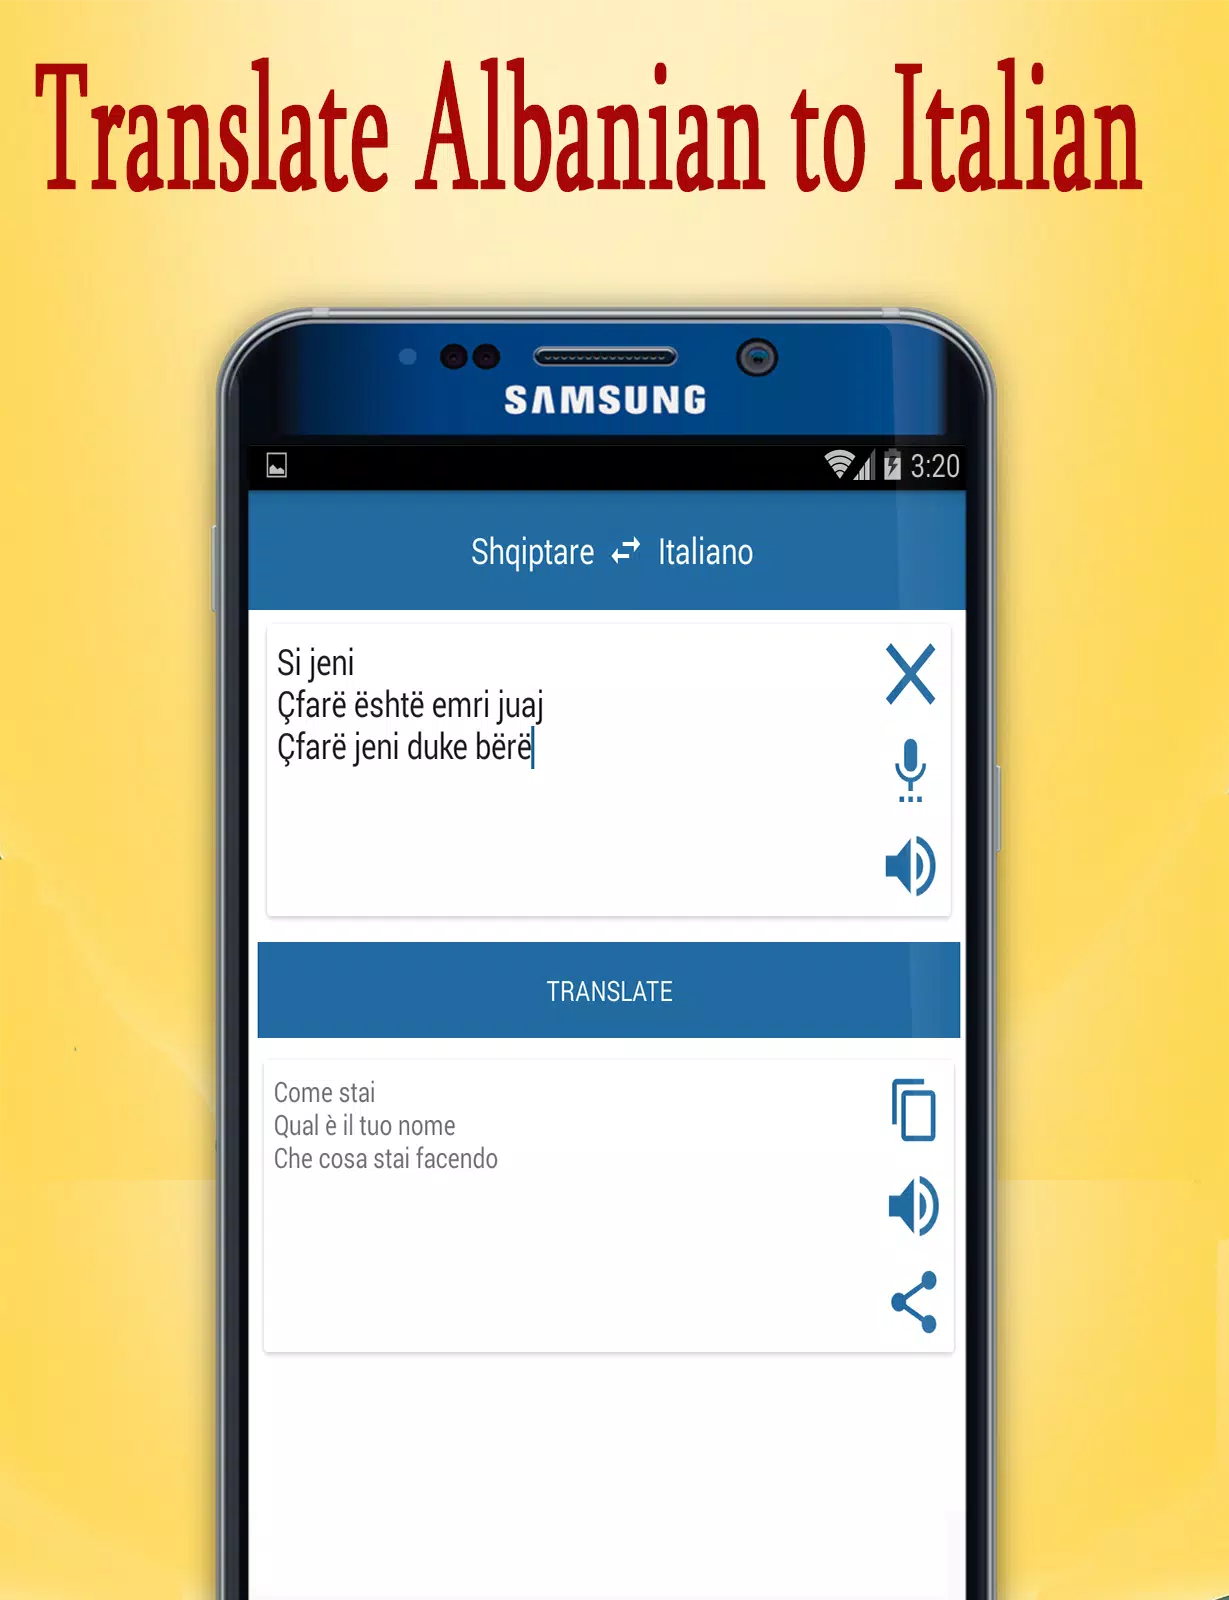 Albanian to Italian Translate for Android - APK Download